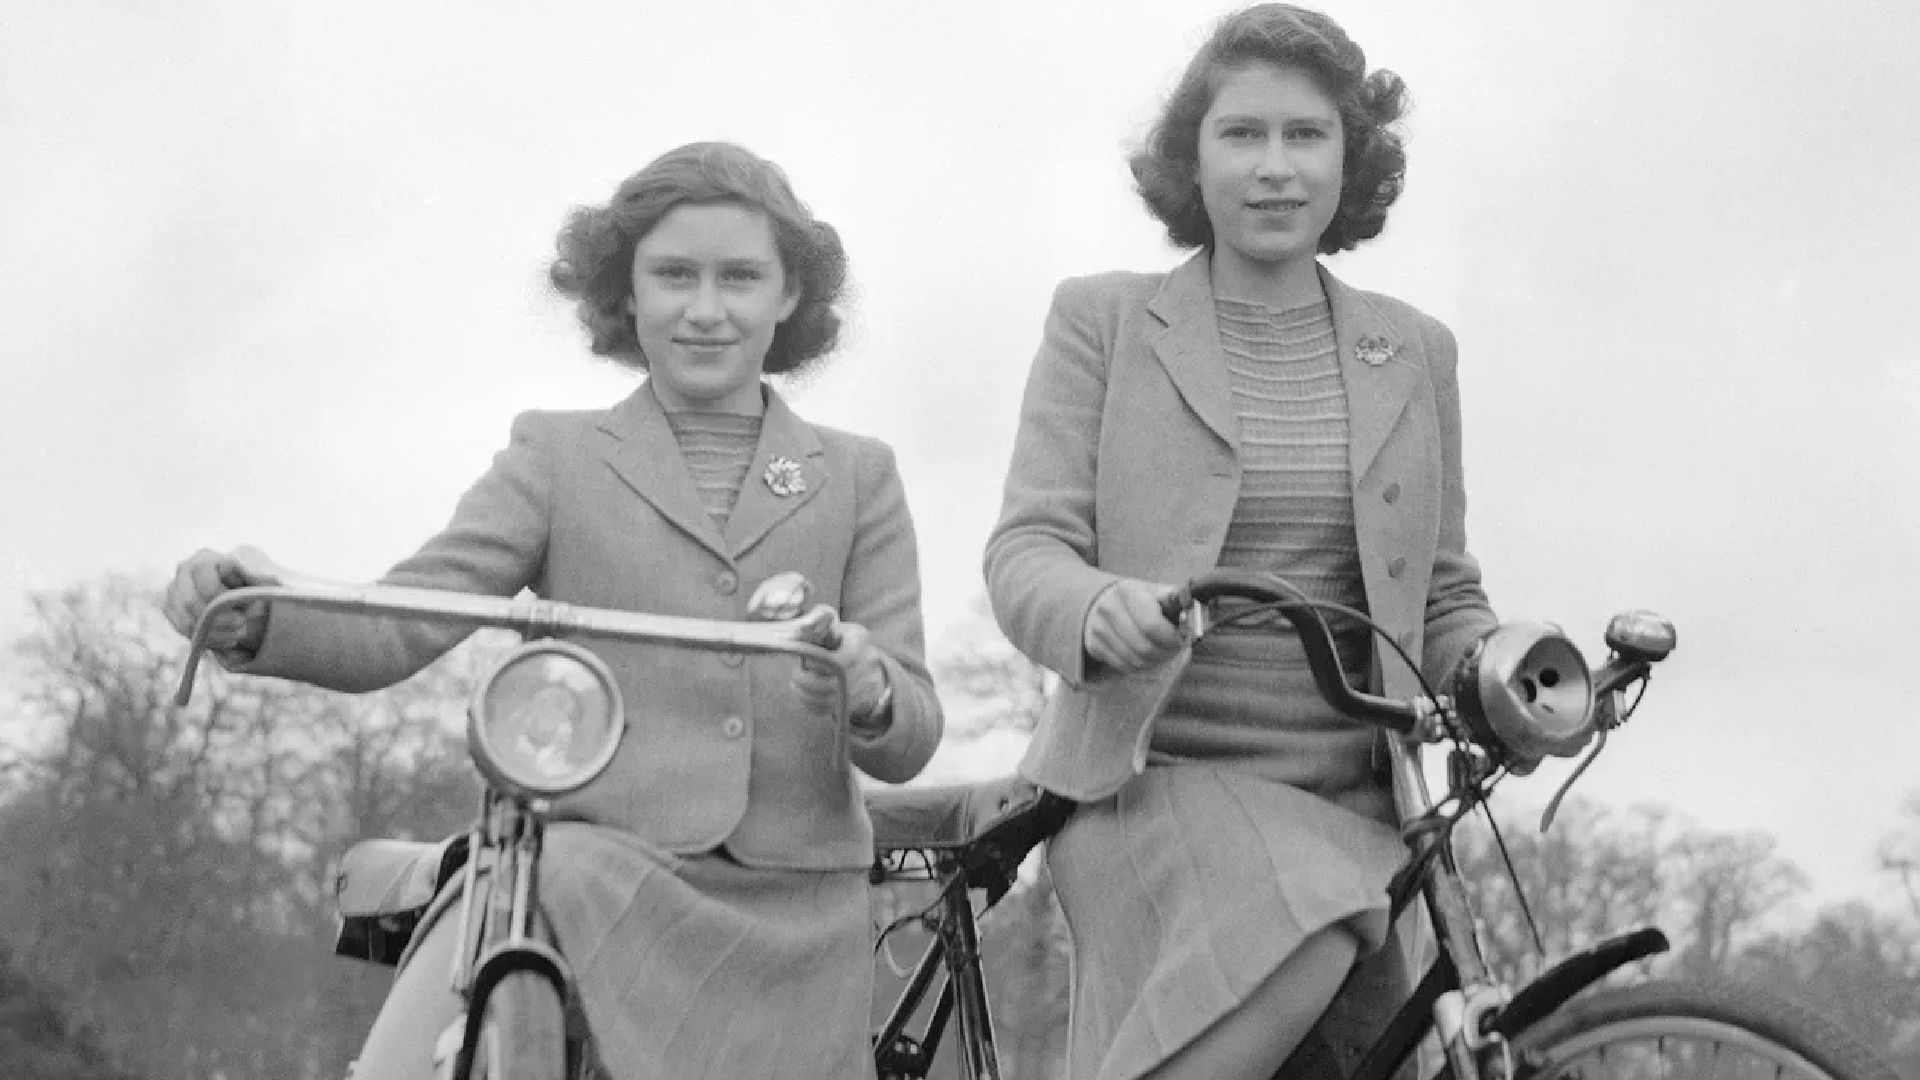 <p>                     Showcasing Queen Elizabeth’s bond with her younger sister Princess Margaret, the two royals were pictured going for a bike ride together on the grounds of the Royal Lodge in April 1942. Located close to Windsor Castle, she and Princess Margaret spent a huge part of their childhoods in Berkshire and even lived there during World War II instead of being evacuated further afield.                   </p>